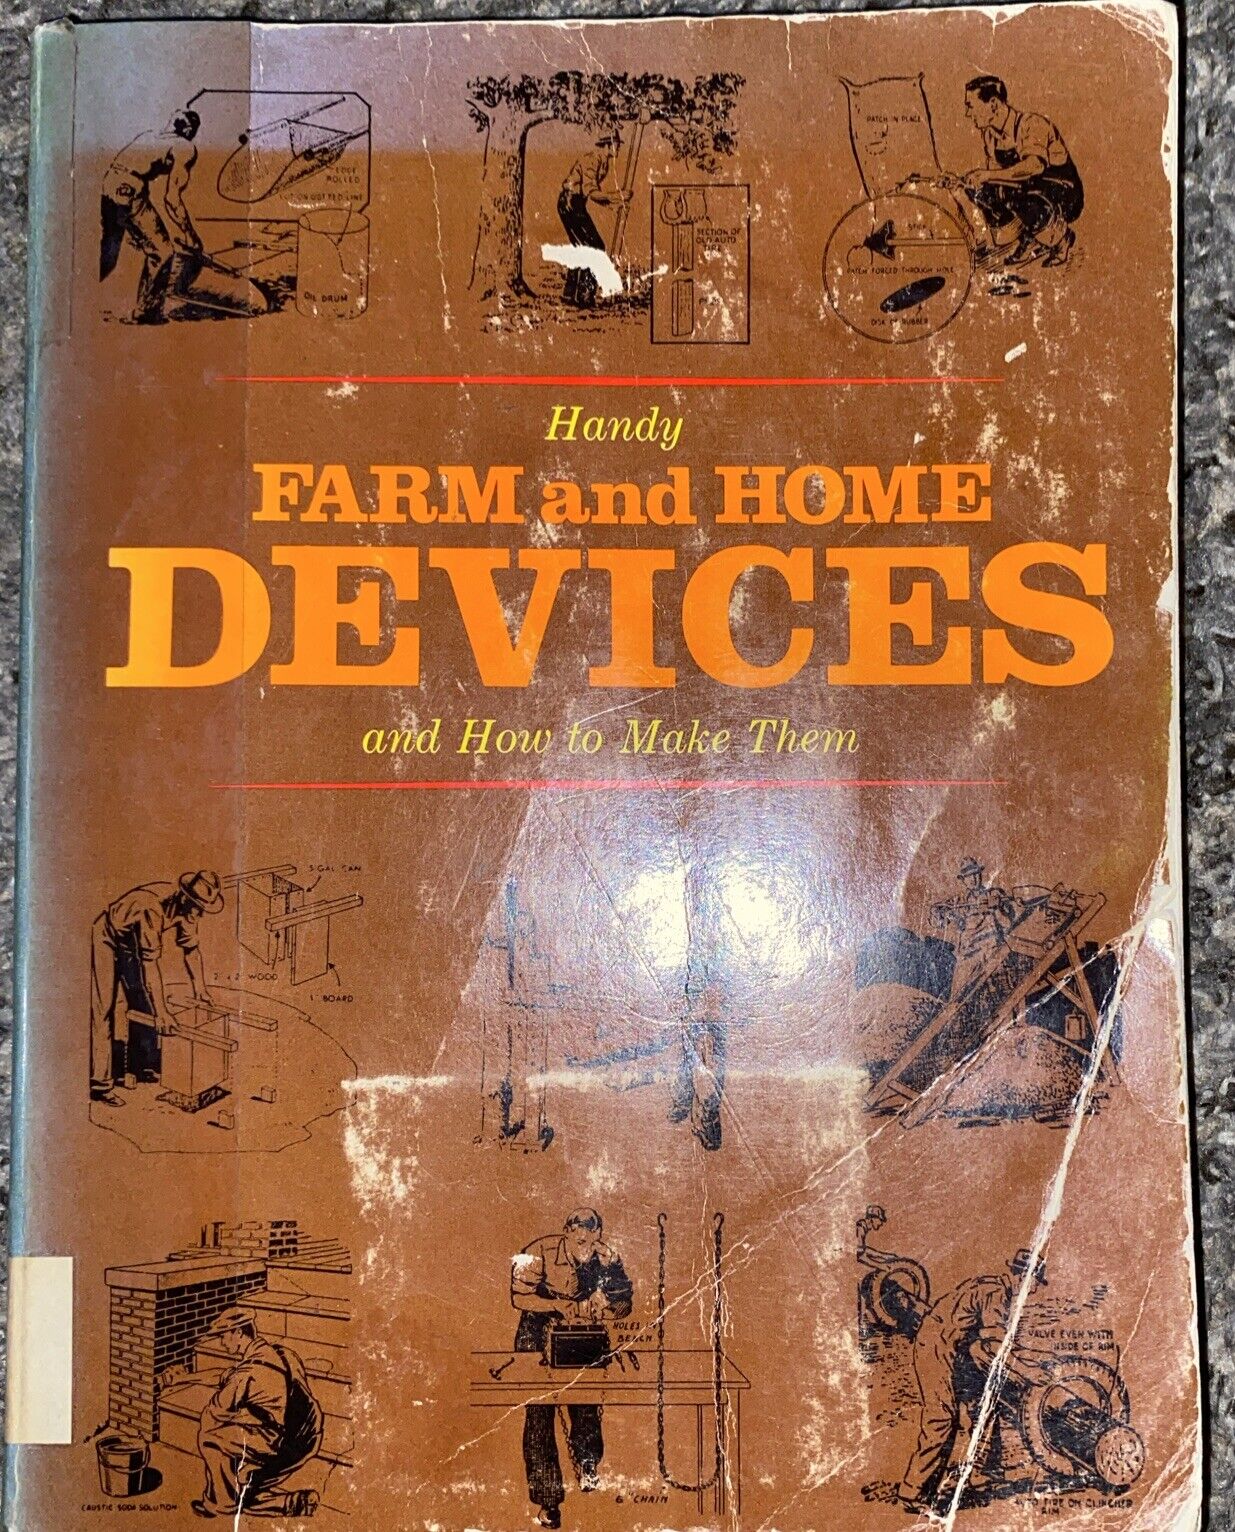 Handy Farm and Home Devices and How to Make Them by J.V. Bartlett - PB